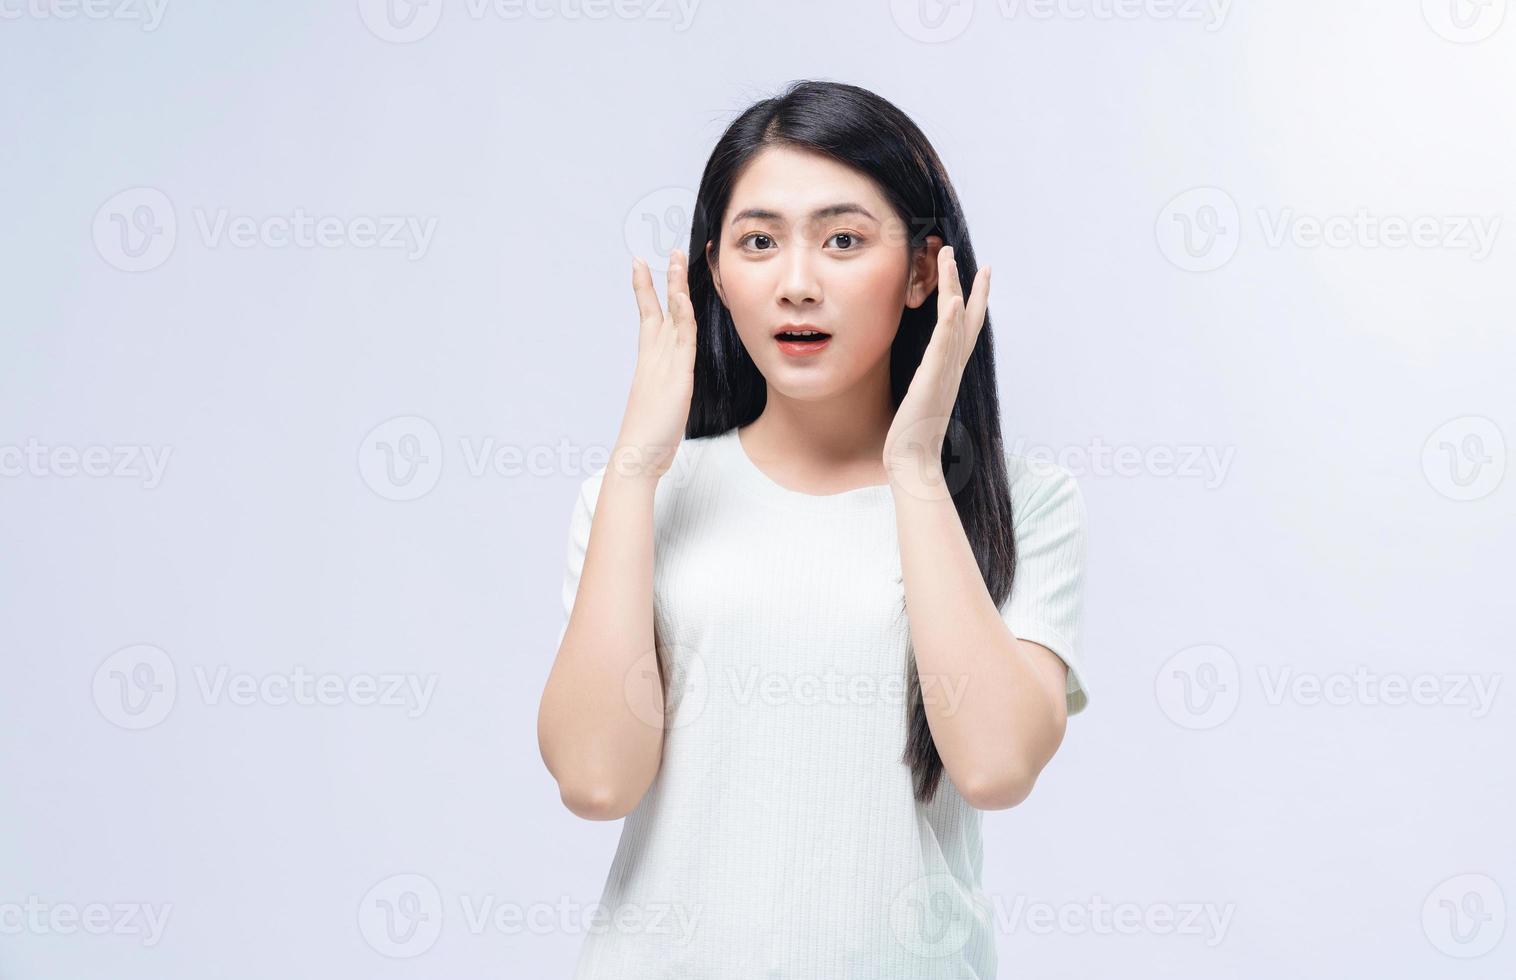 Young Asian girl posing on background photo